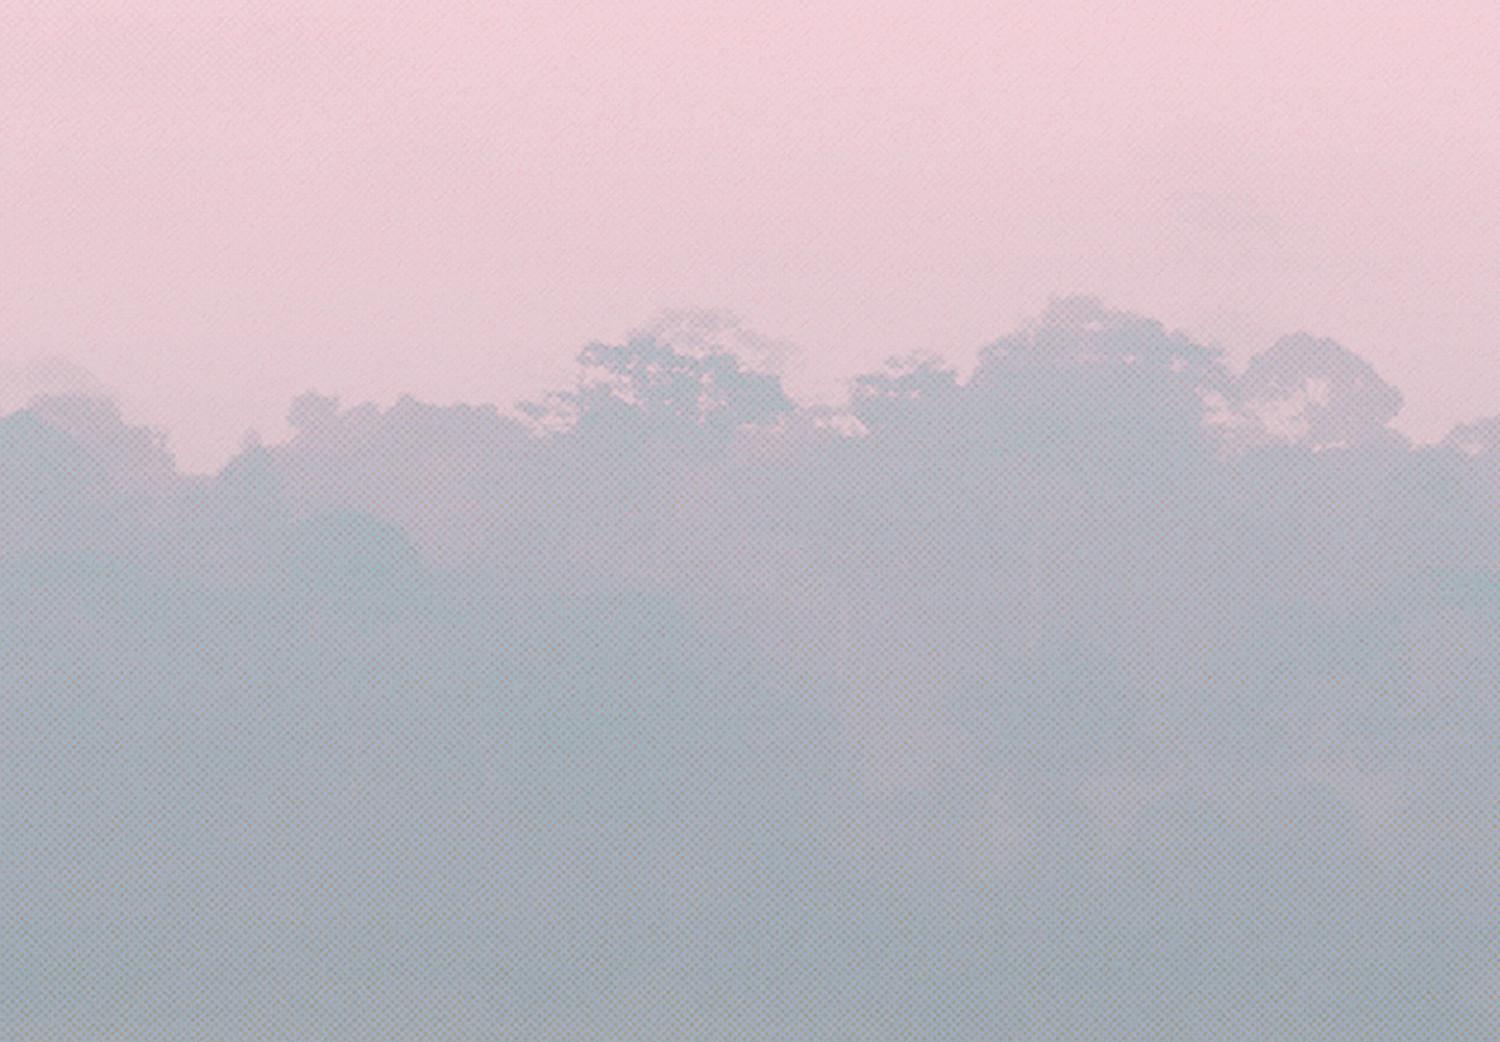 Poster Misty Dawn - landscape of trees amid dense fog in pastel colors